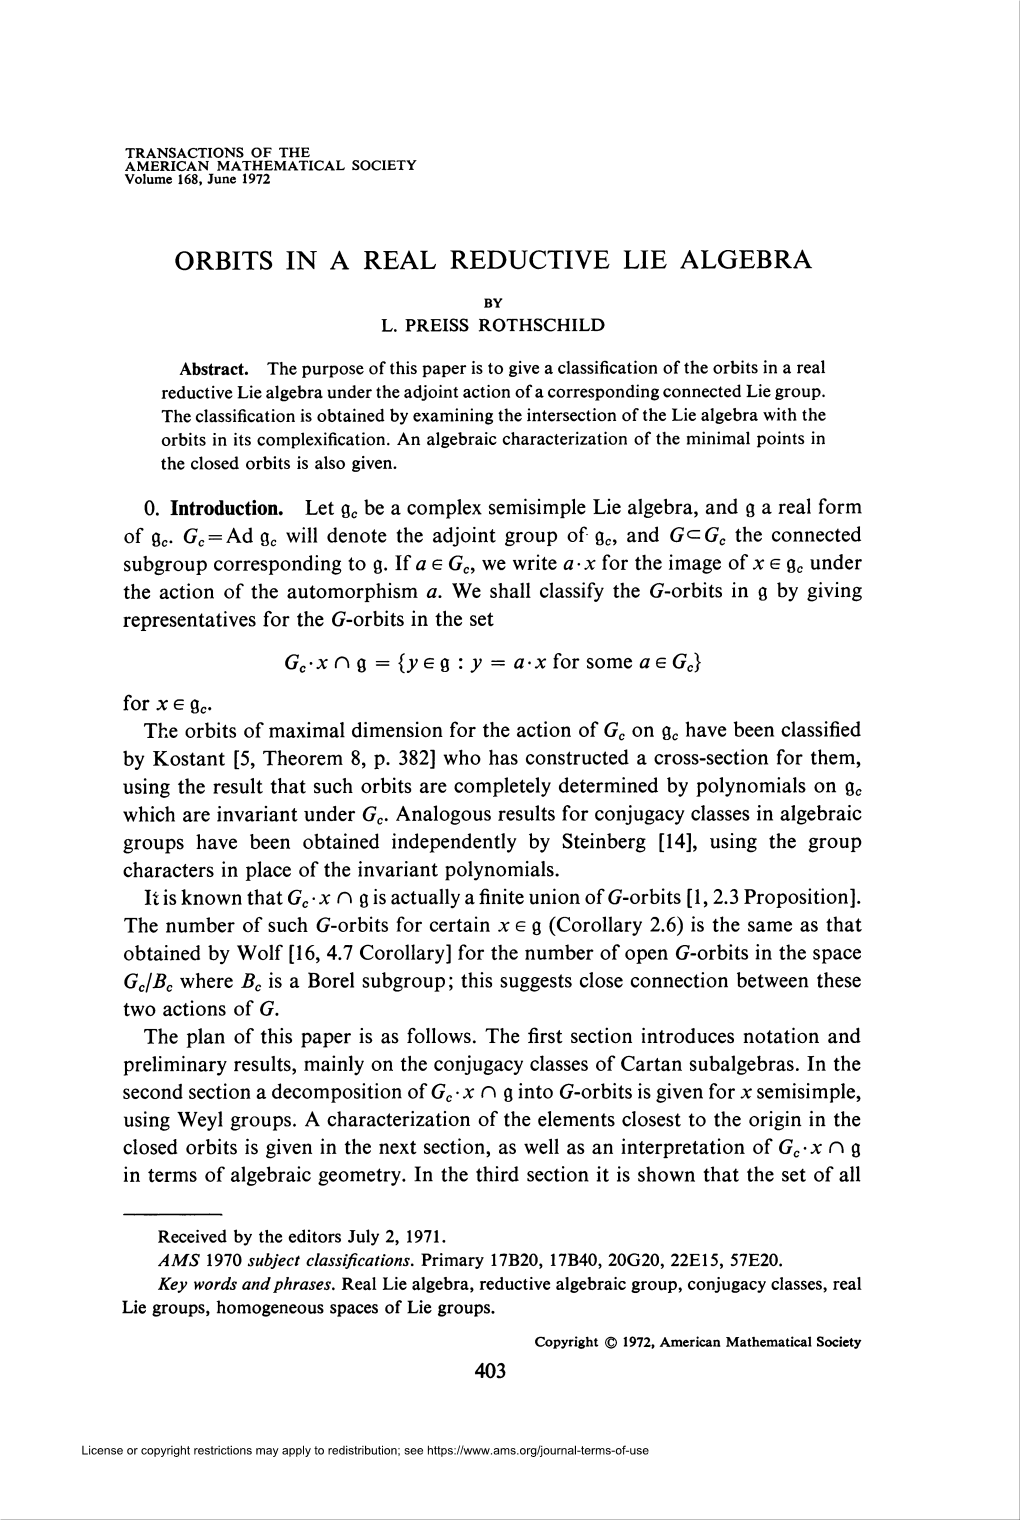 Orbits in a Real Reductive Lie Algebra